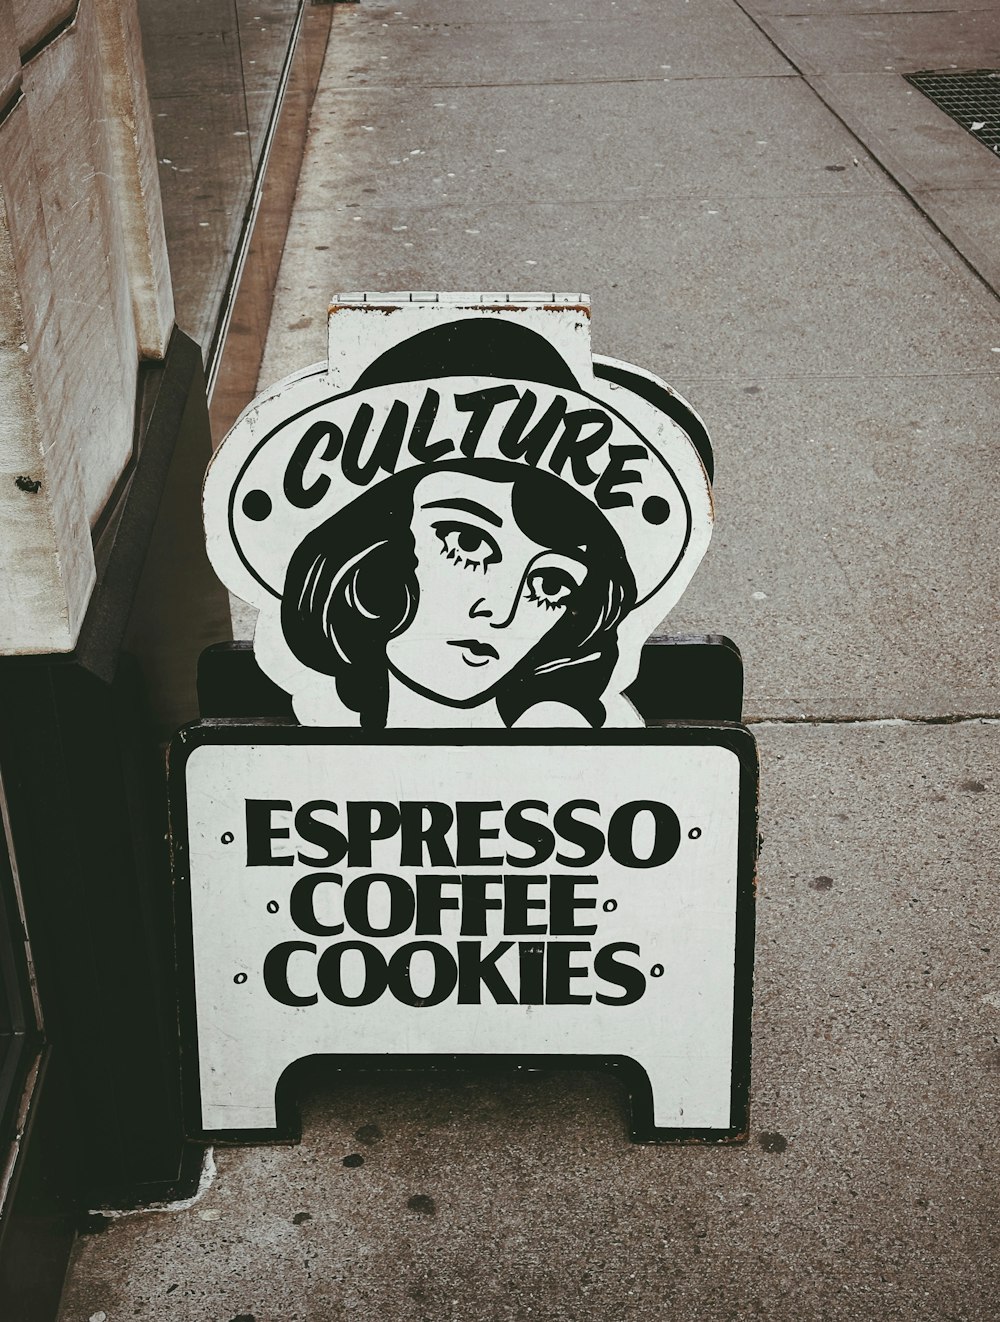 a sign on the side of a building that says culture espresso coffee cookies